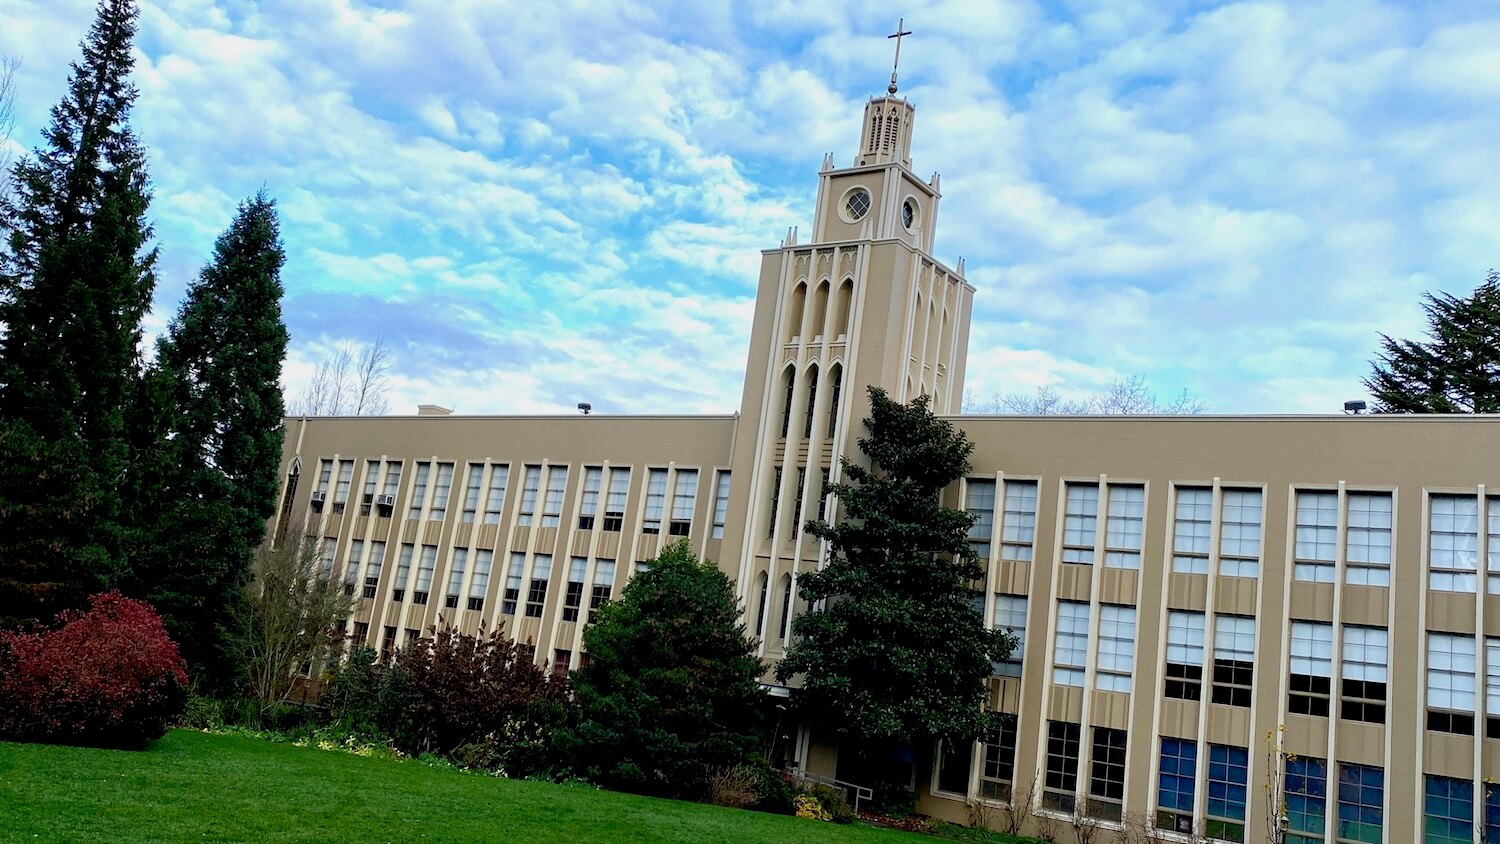 An Art Deco building on the campus of Seattle University commands a presence in front of a grassy field framed in by fir trees and a bright red shrub.  The sky is blue with scattered clouds and the cross at the top of the building seems to reach to the heavens. 